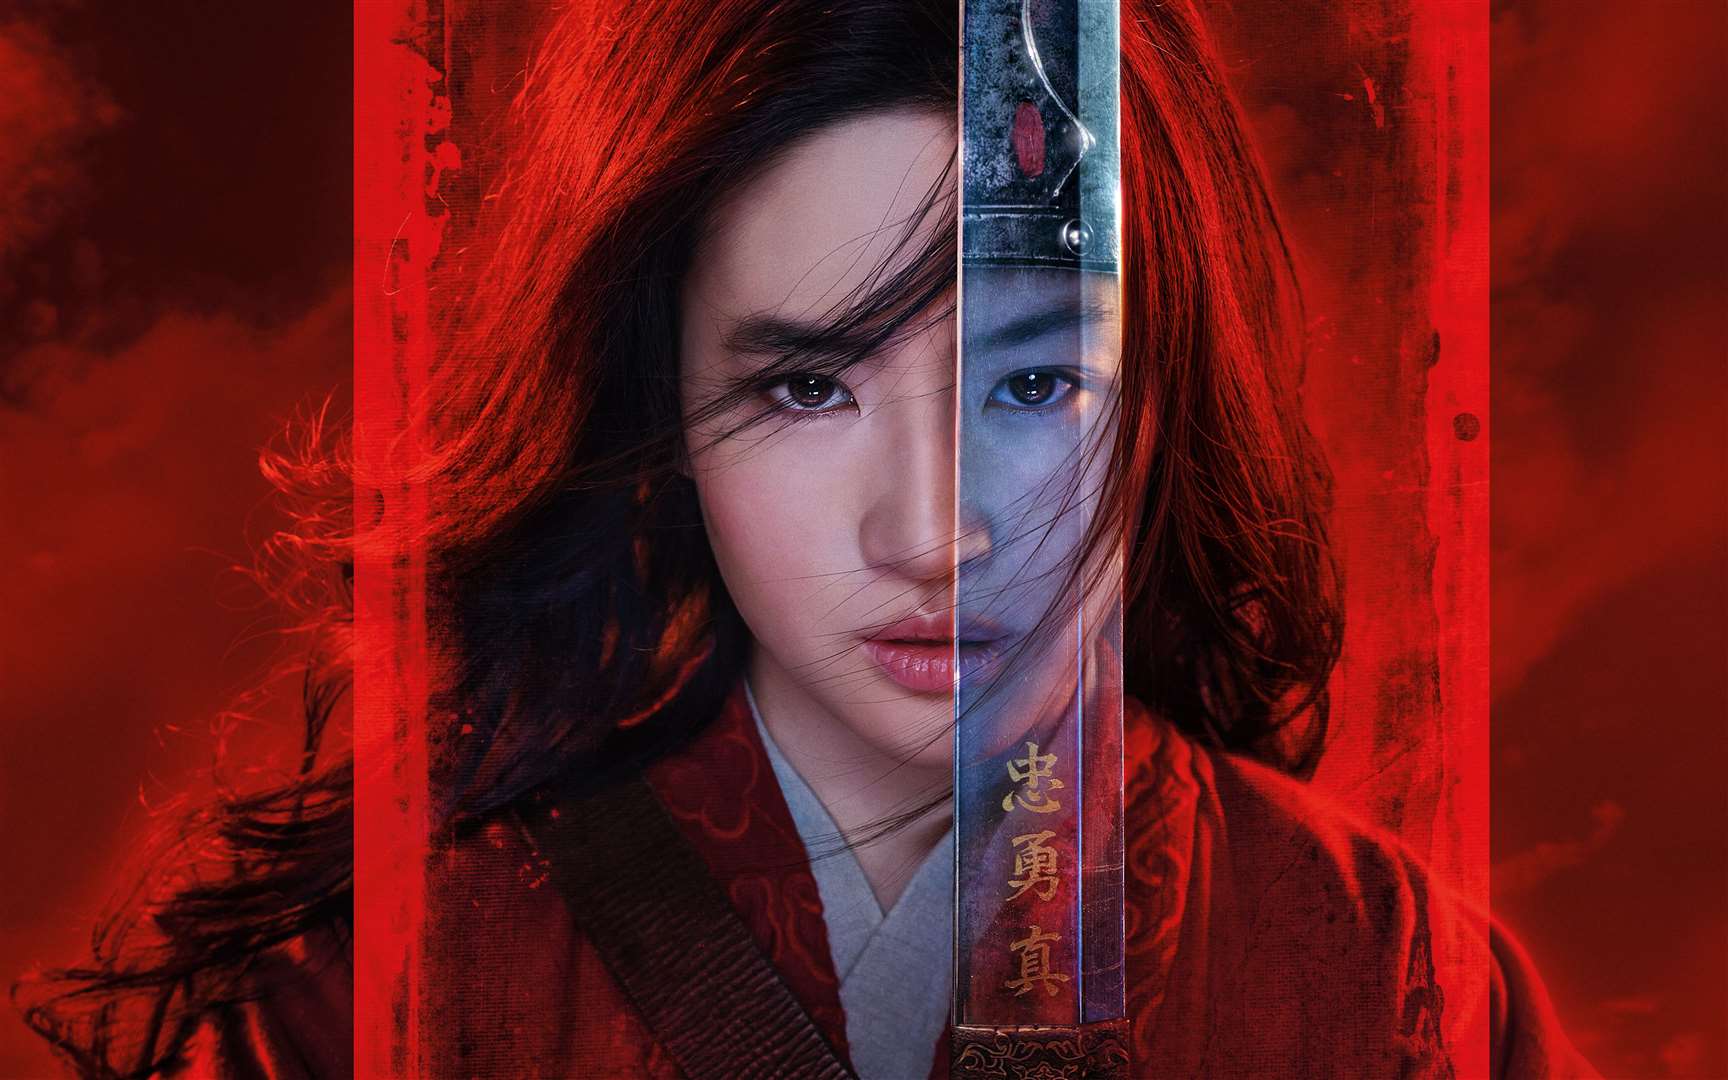 The remake of Disney's Mulan is one of the first new films set to be shown in July